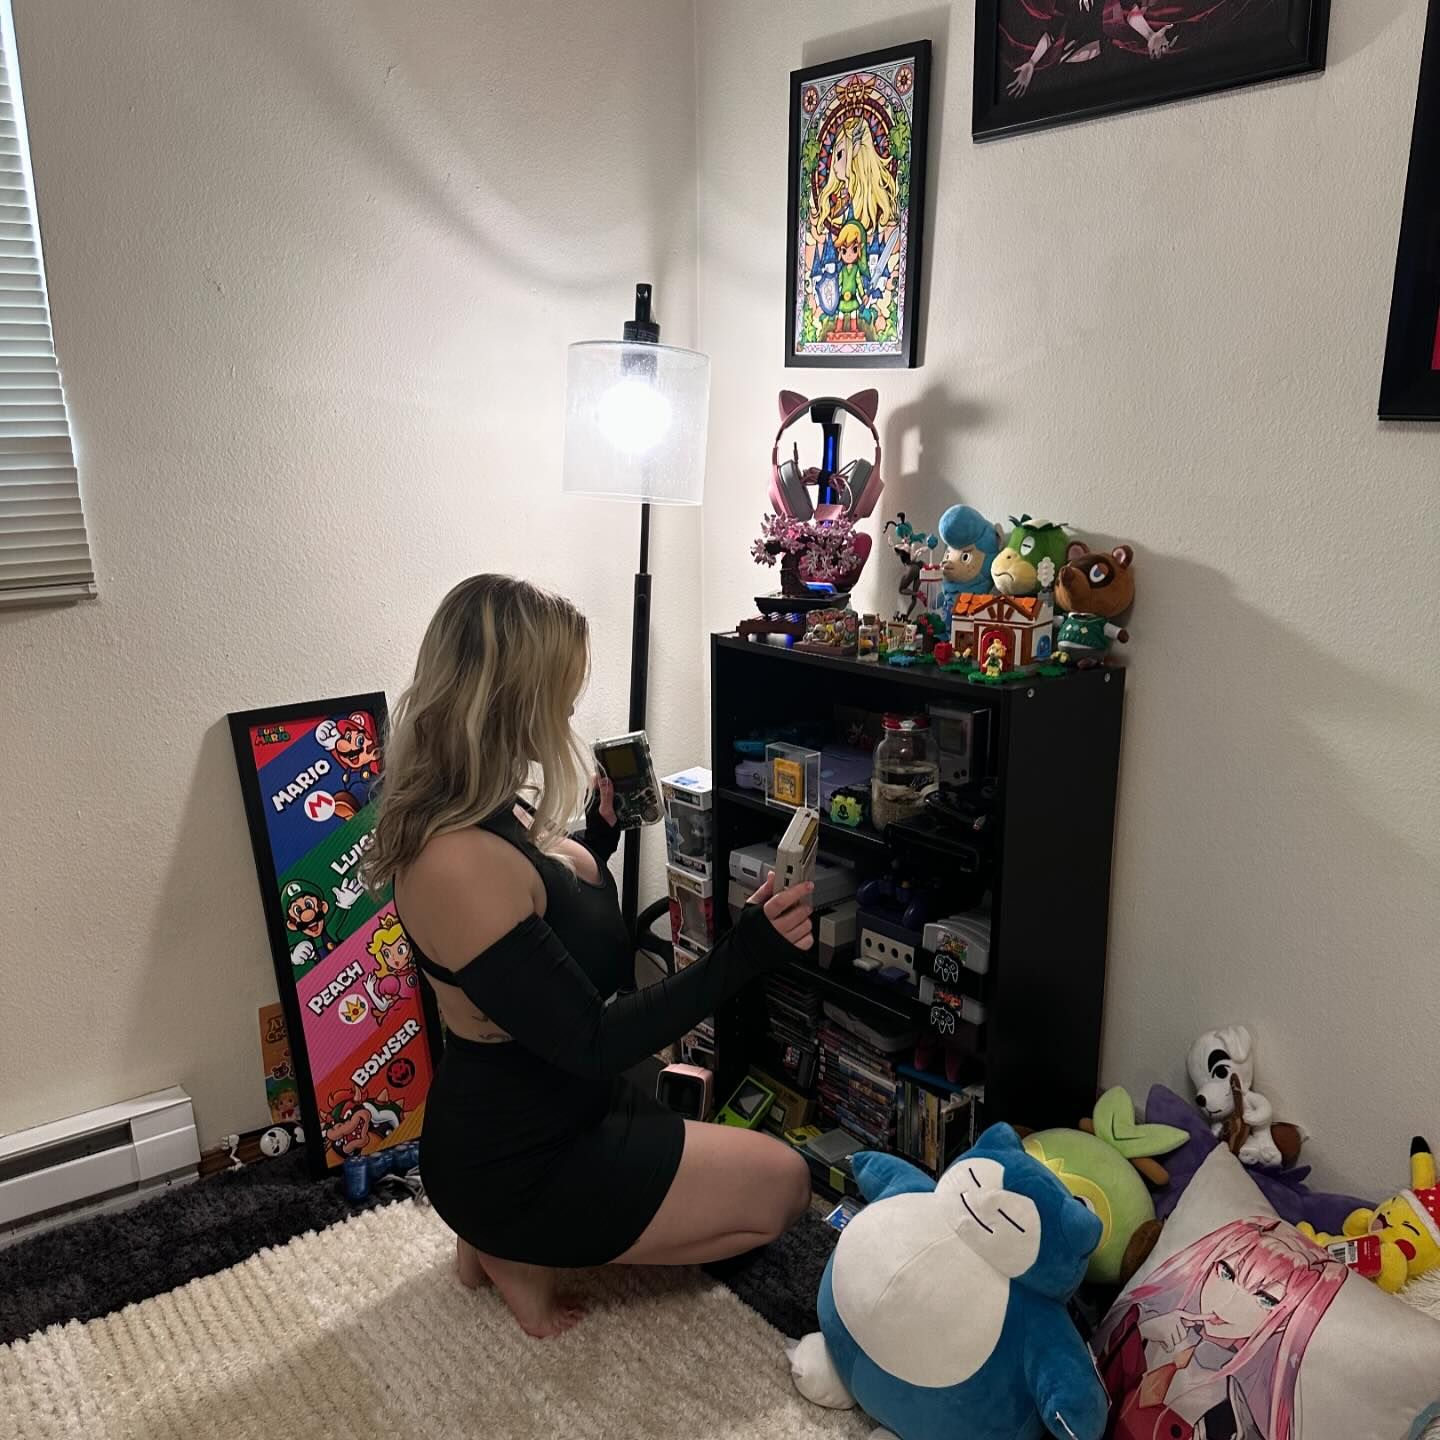 Can’t decide what to play.. 

🤔 to many choices… not enough choices. 😉

#gamergirl #gamecollection #retrogamer #fyp #gameroom #gaming #retrogirl #retro #style #egirl #gamer #retrocollective